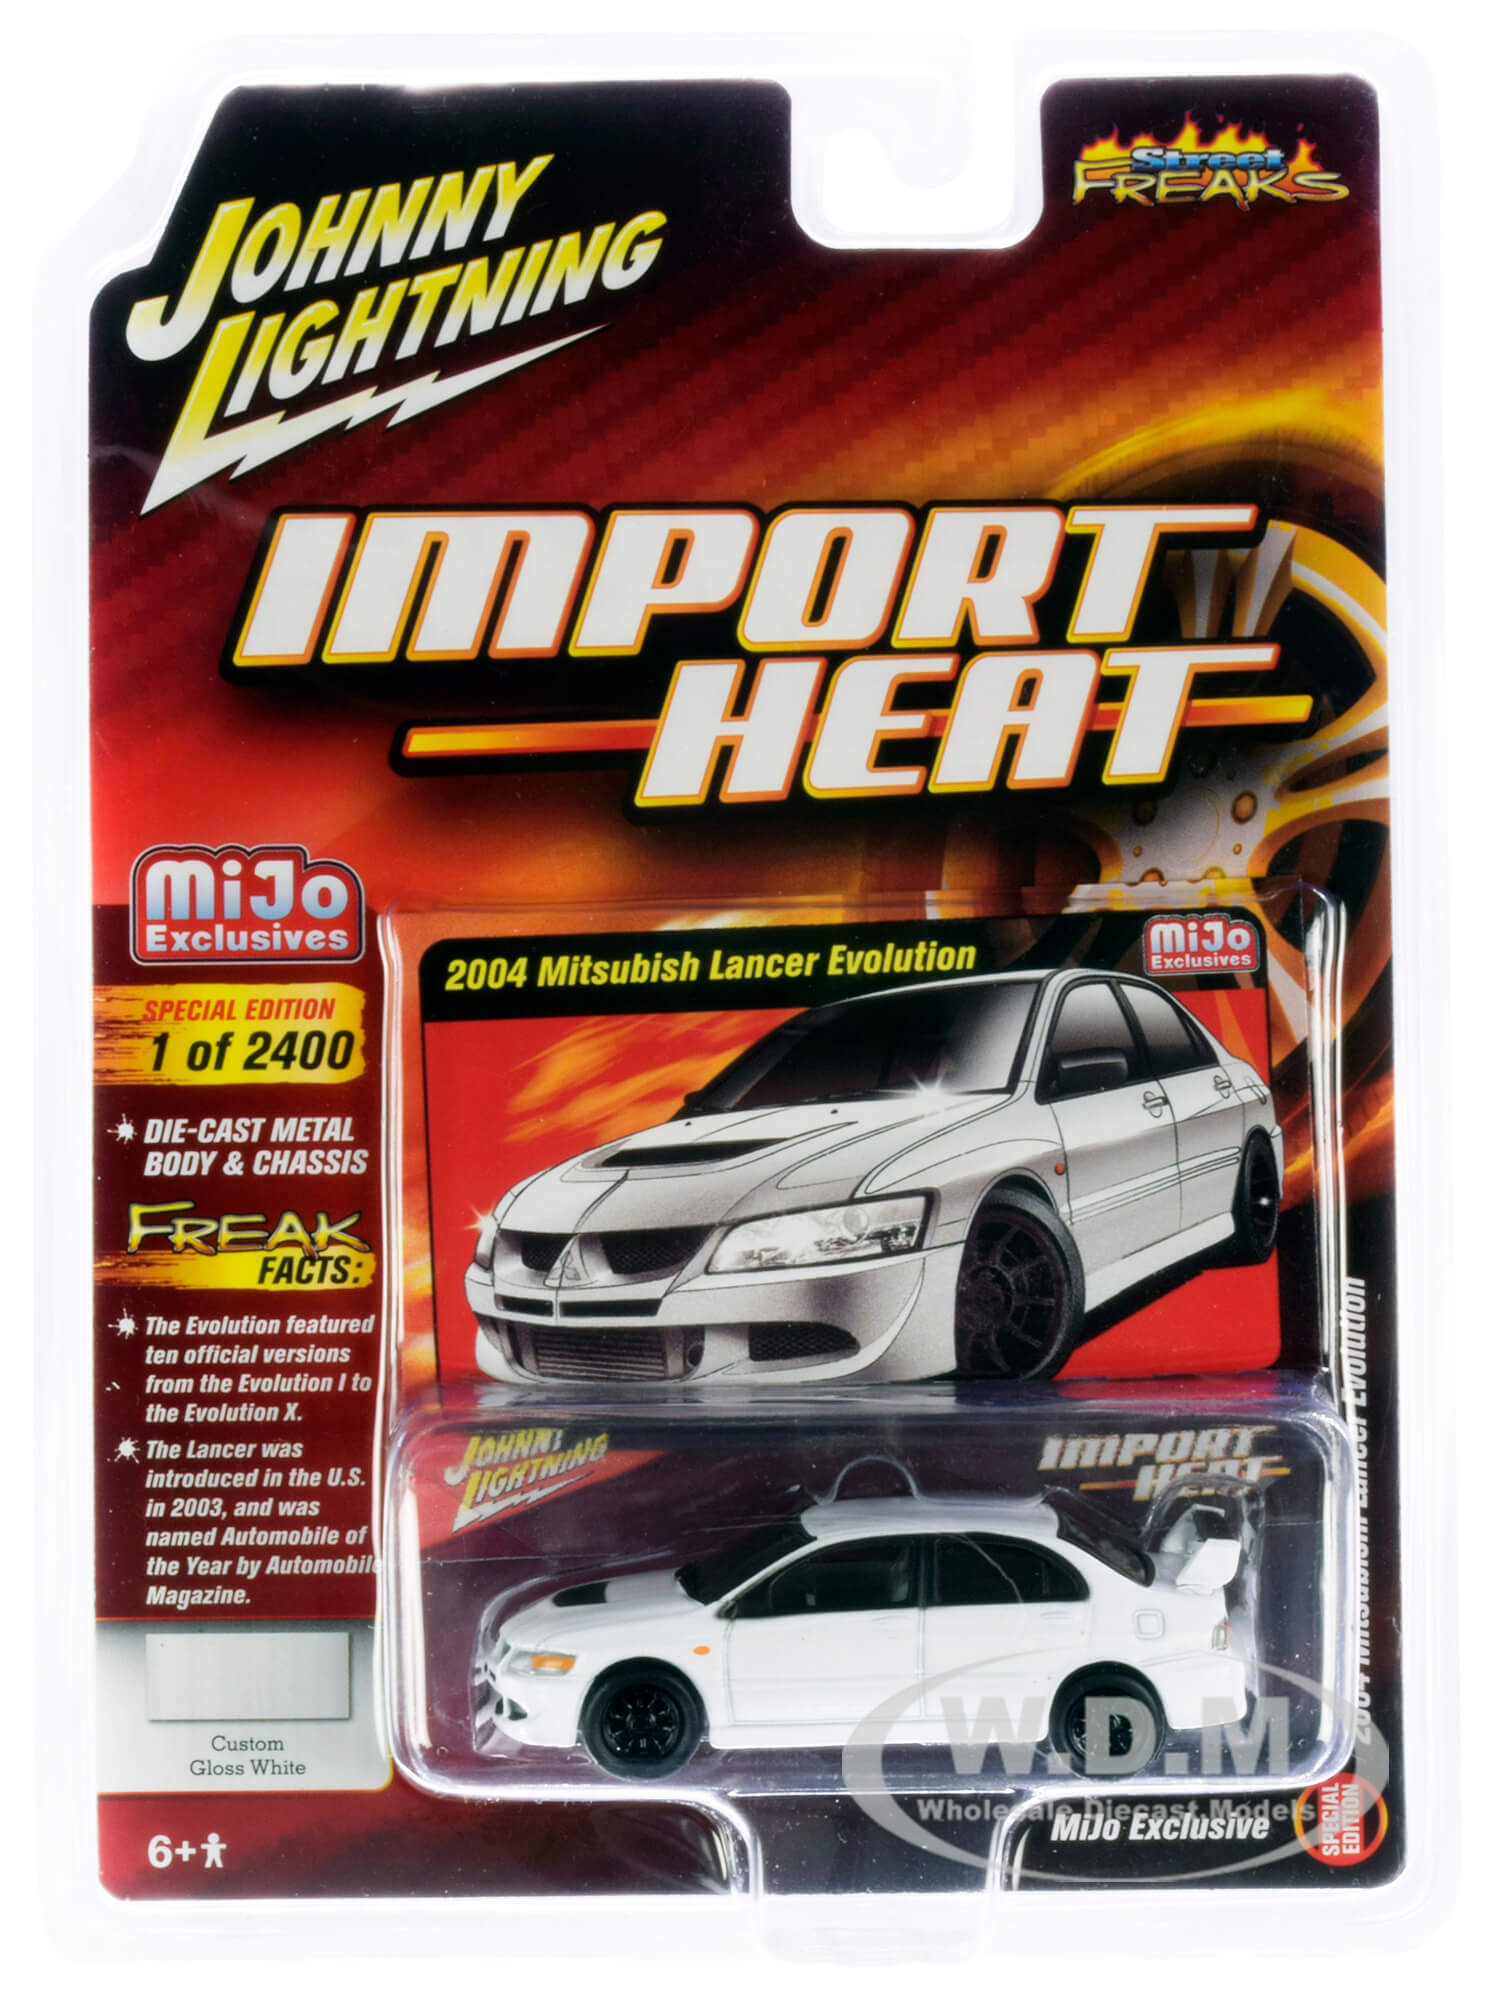 2004 Mitsubishi Lancer Evolution White With Black Wheels "import Heat" "street Freaks" Series Limited Edition To 2400 Pieces Worldwide 1/64 Diecast M